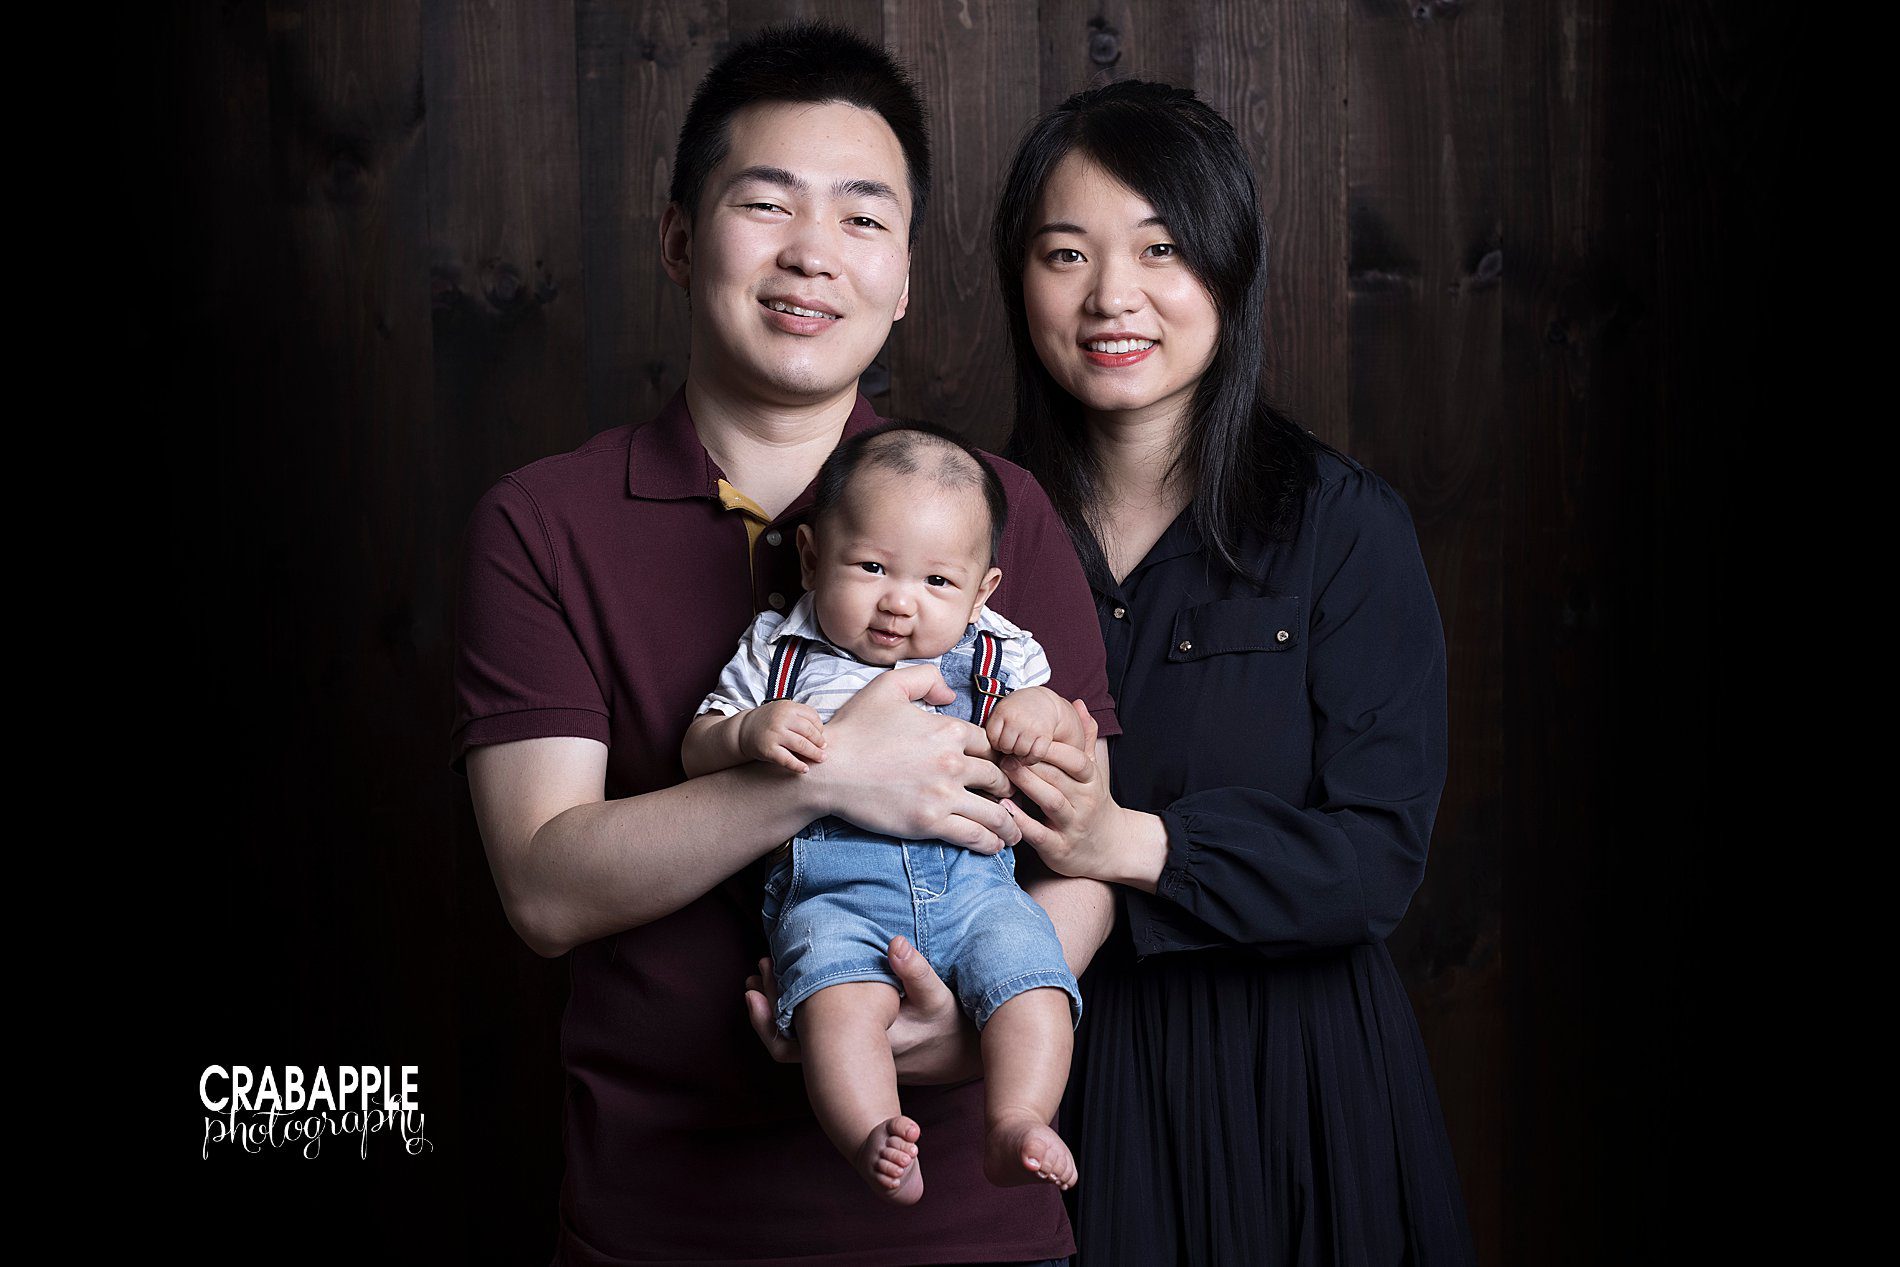 family photos with 100 day old baby